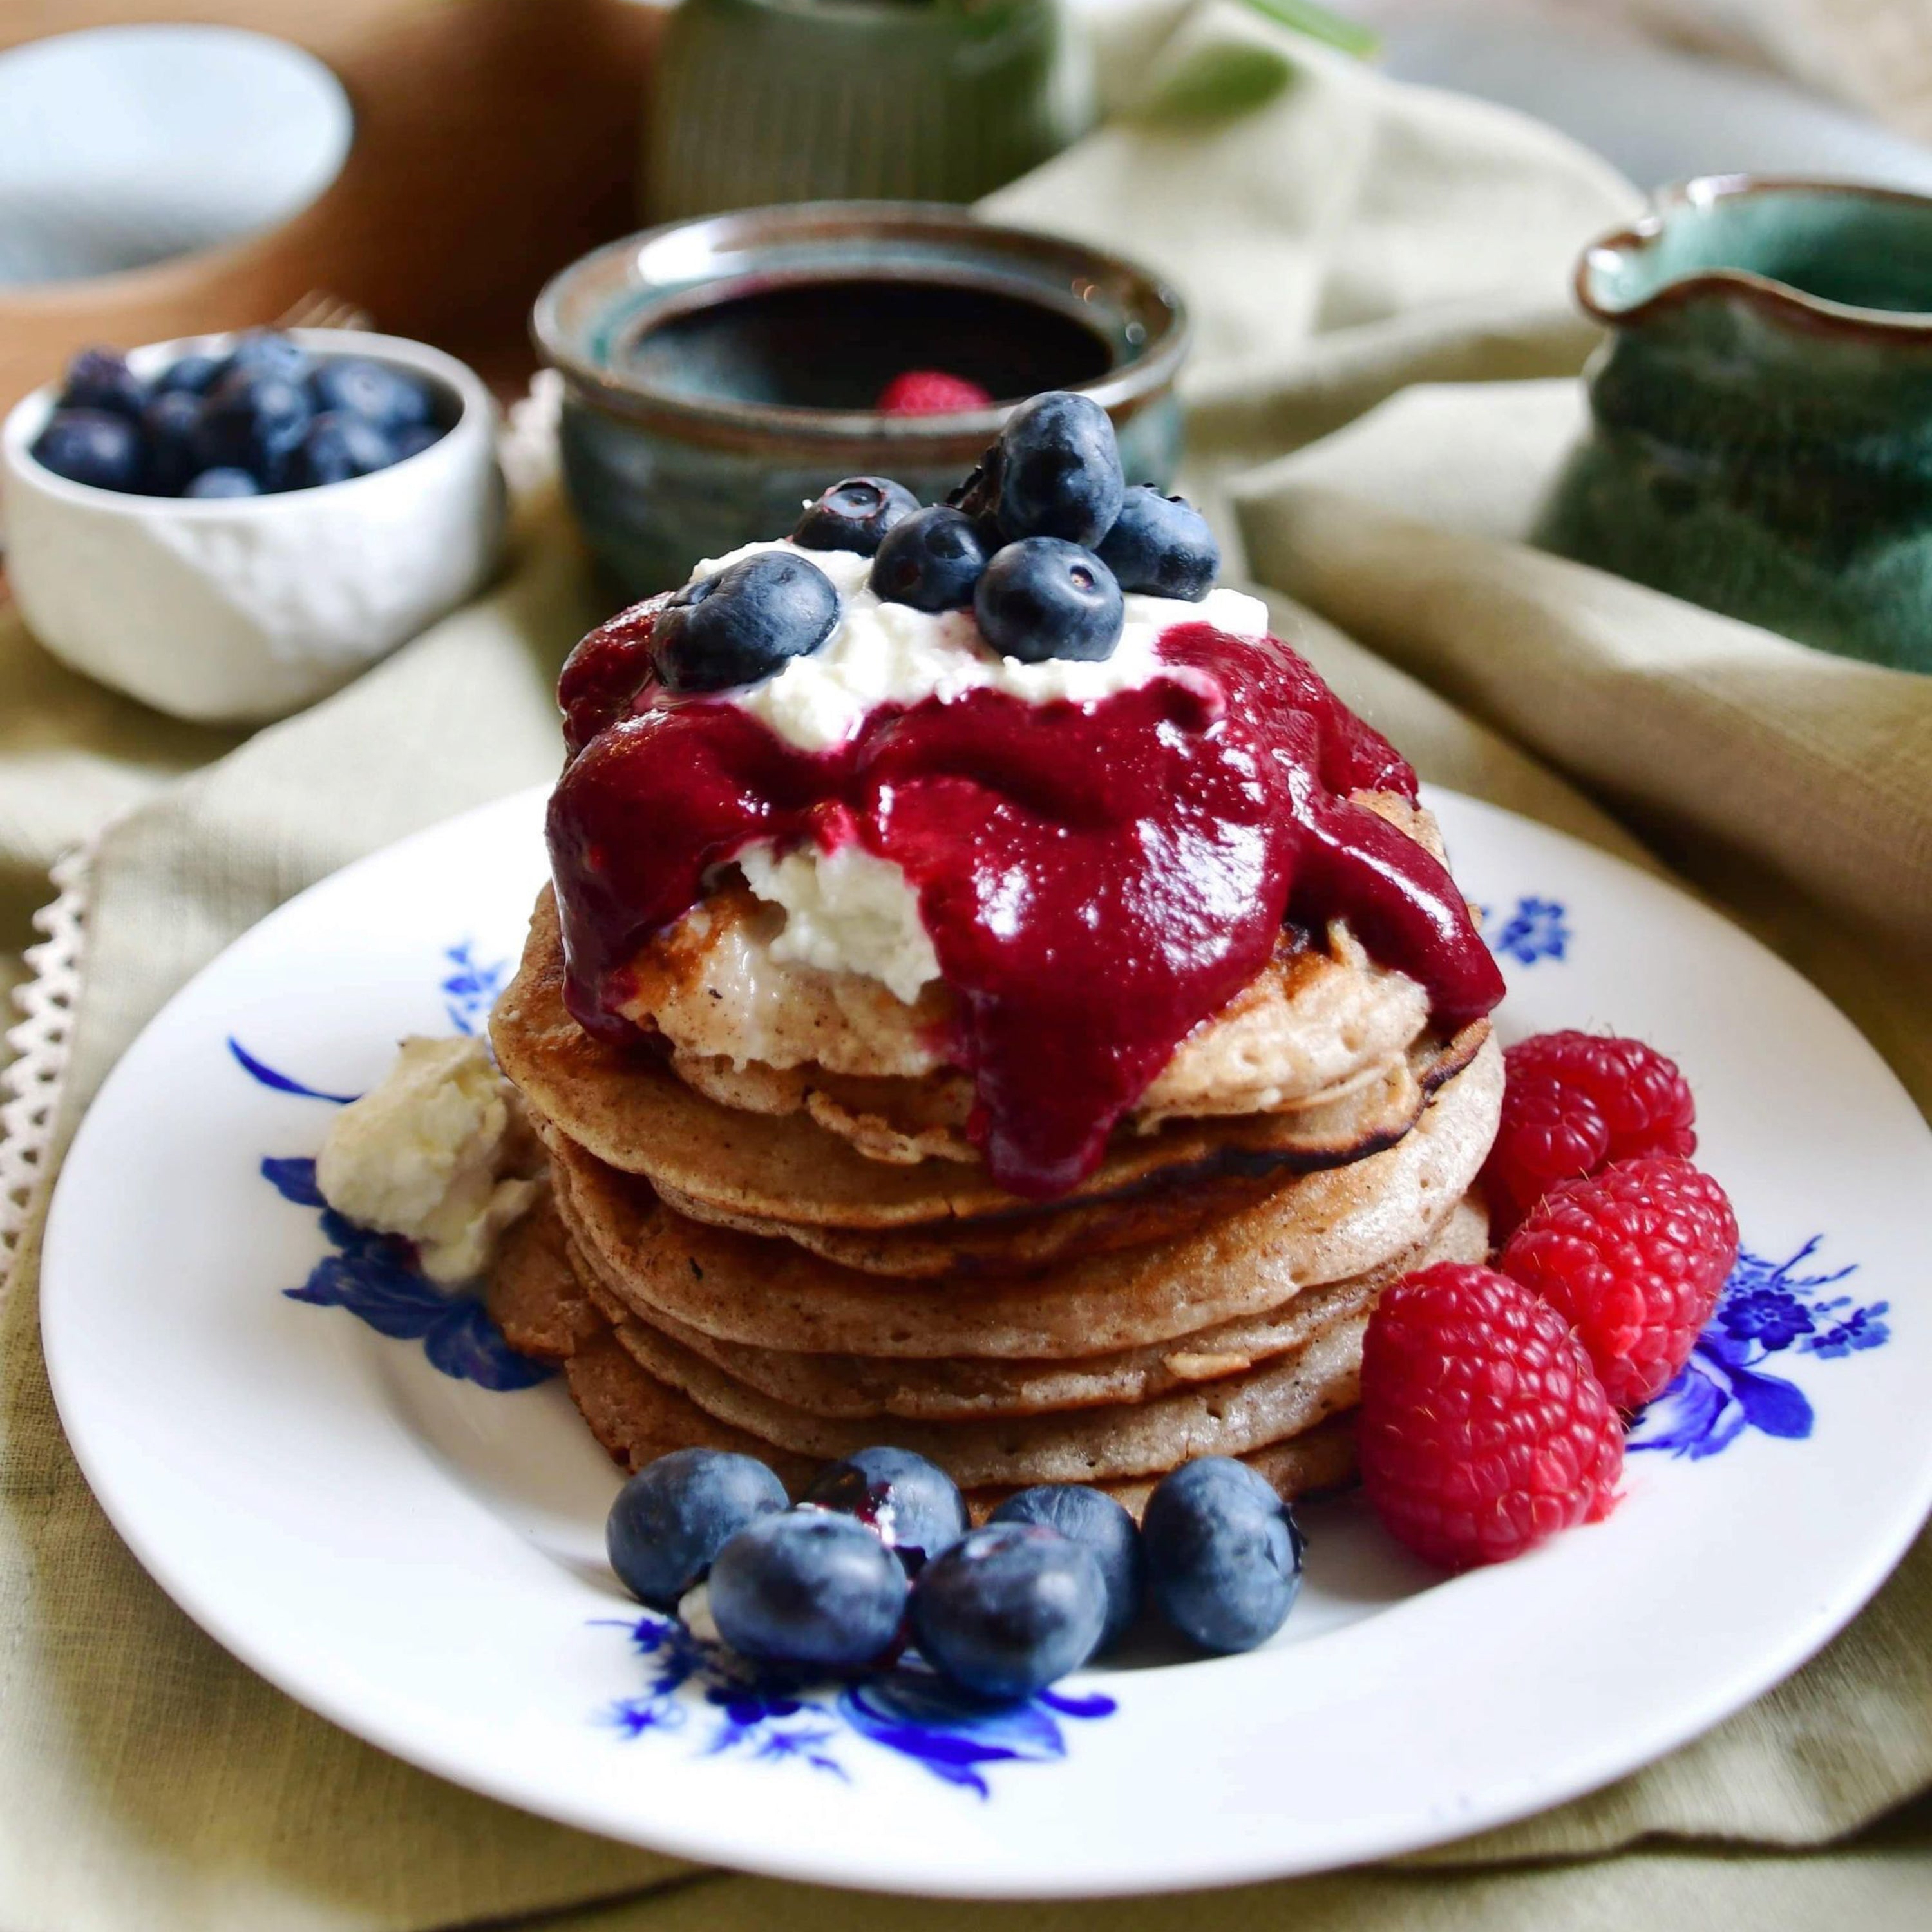 Our perfect pancake recipe and other cosy comfort foods we love